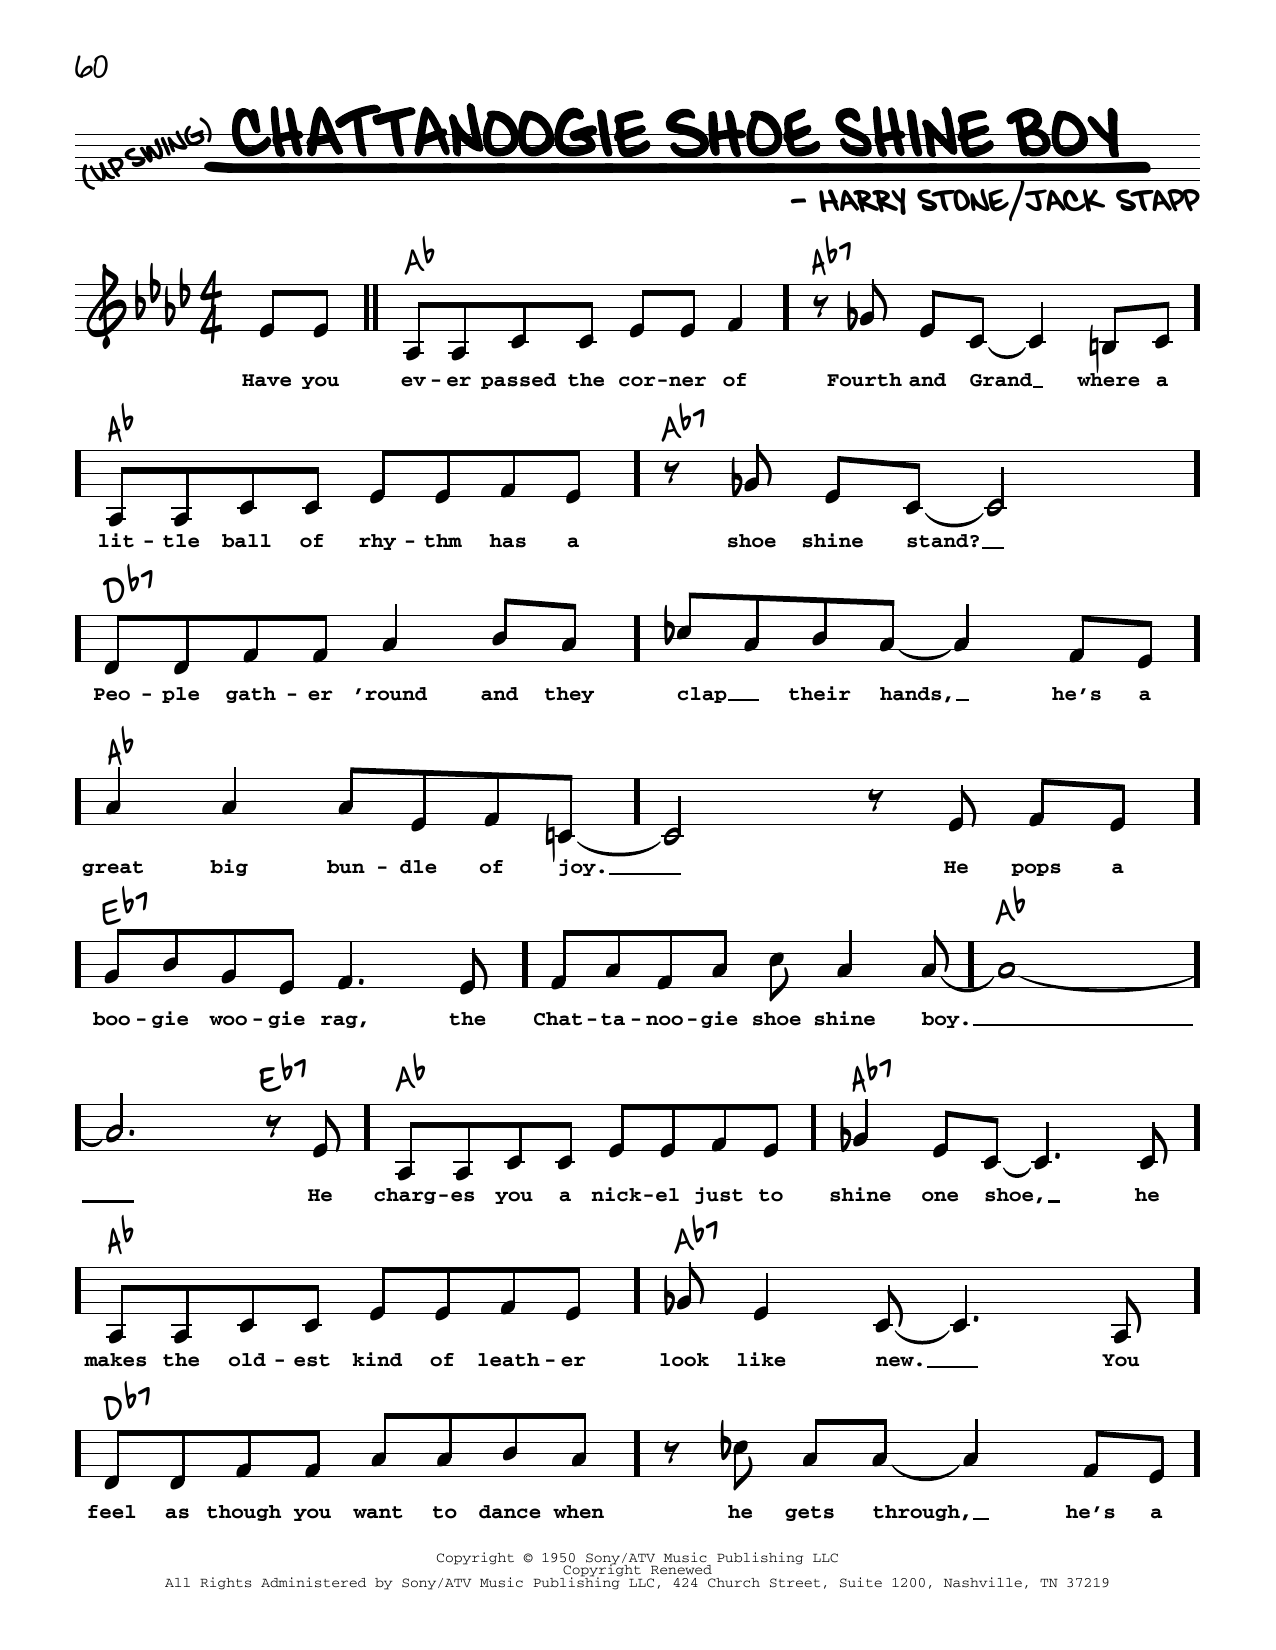 Download Red Foley Chattanoogie Shoe Shine Boy (Low Voice) Sheet Music